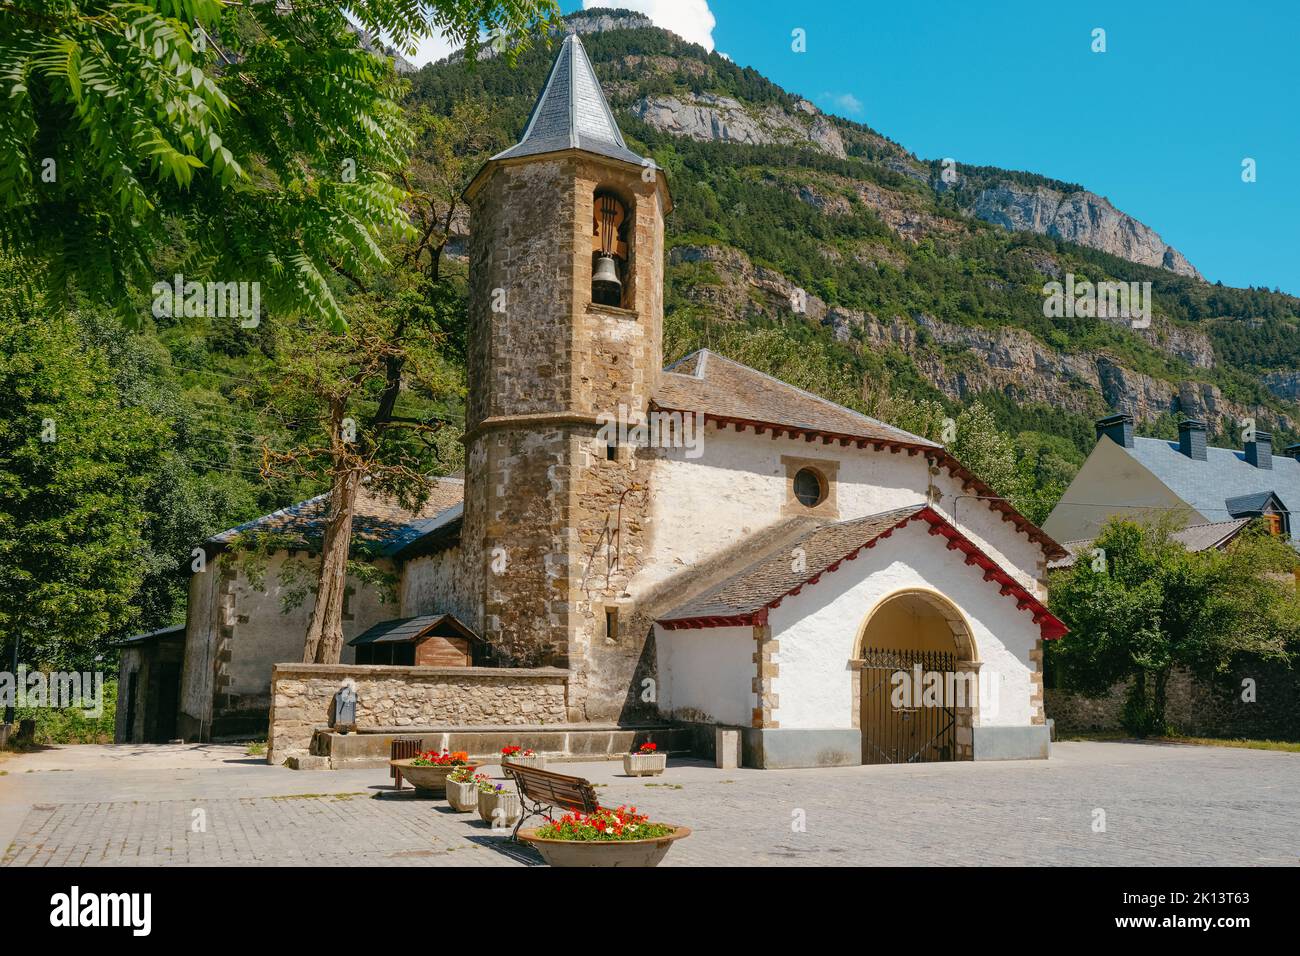 the Asuncion de Nuestra Senora Church in the Old Town of Canfranc, in the Huesca province of Aragon, Spain Stock Photo